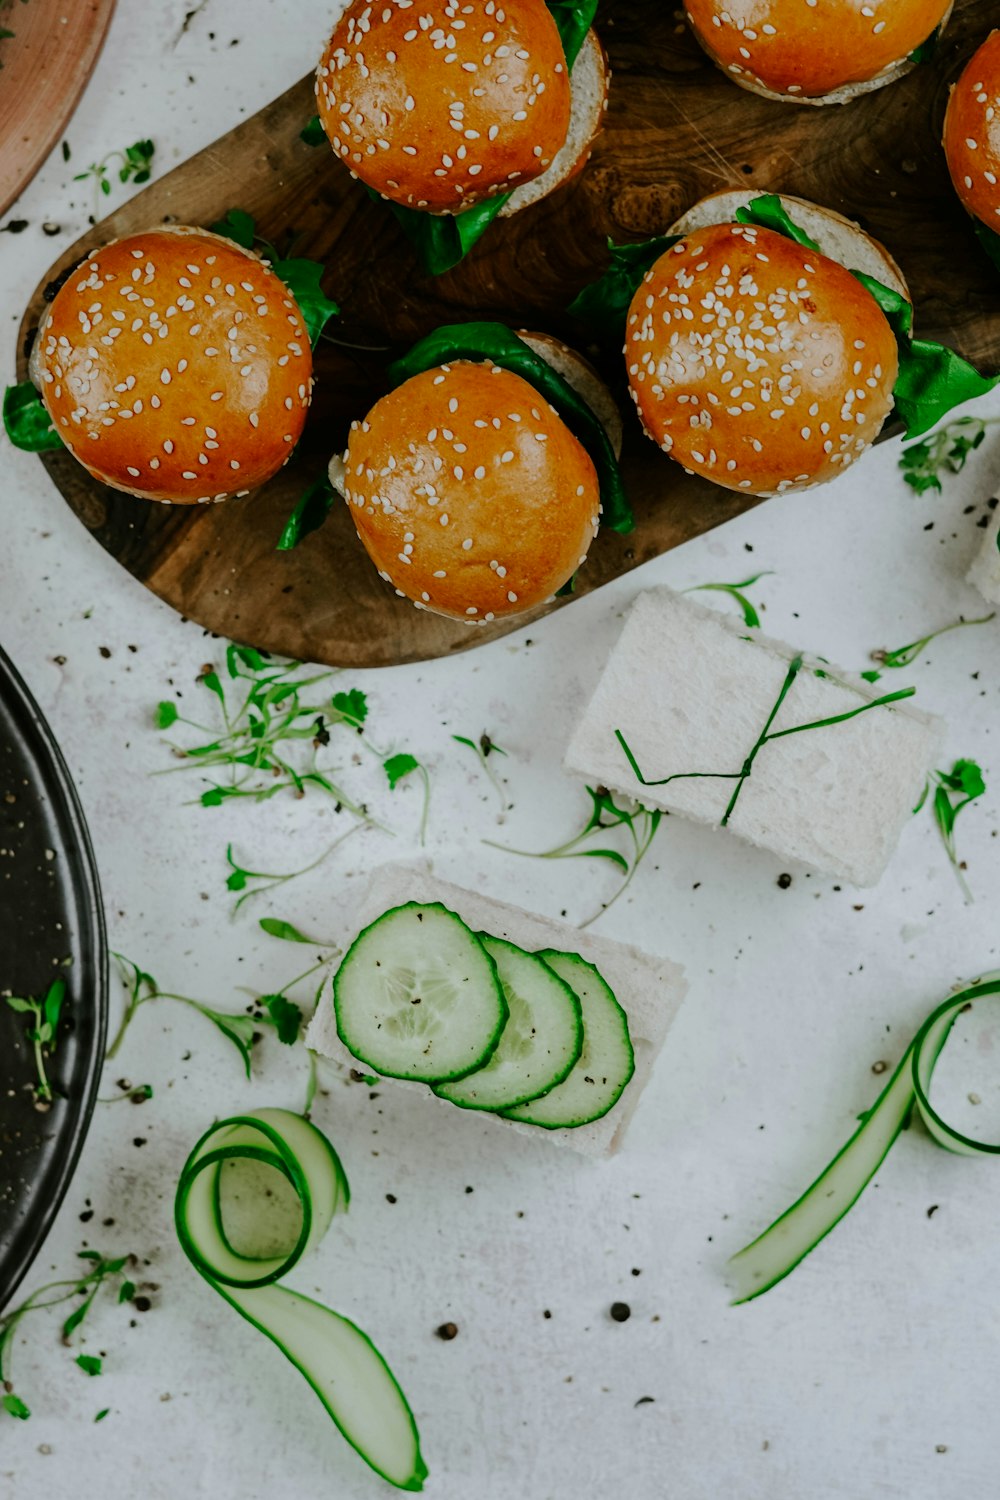 burgers on wooden surface near cucumber slices